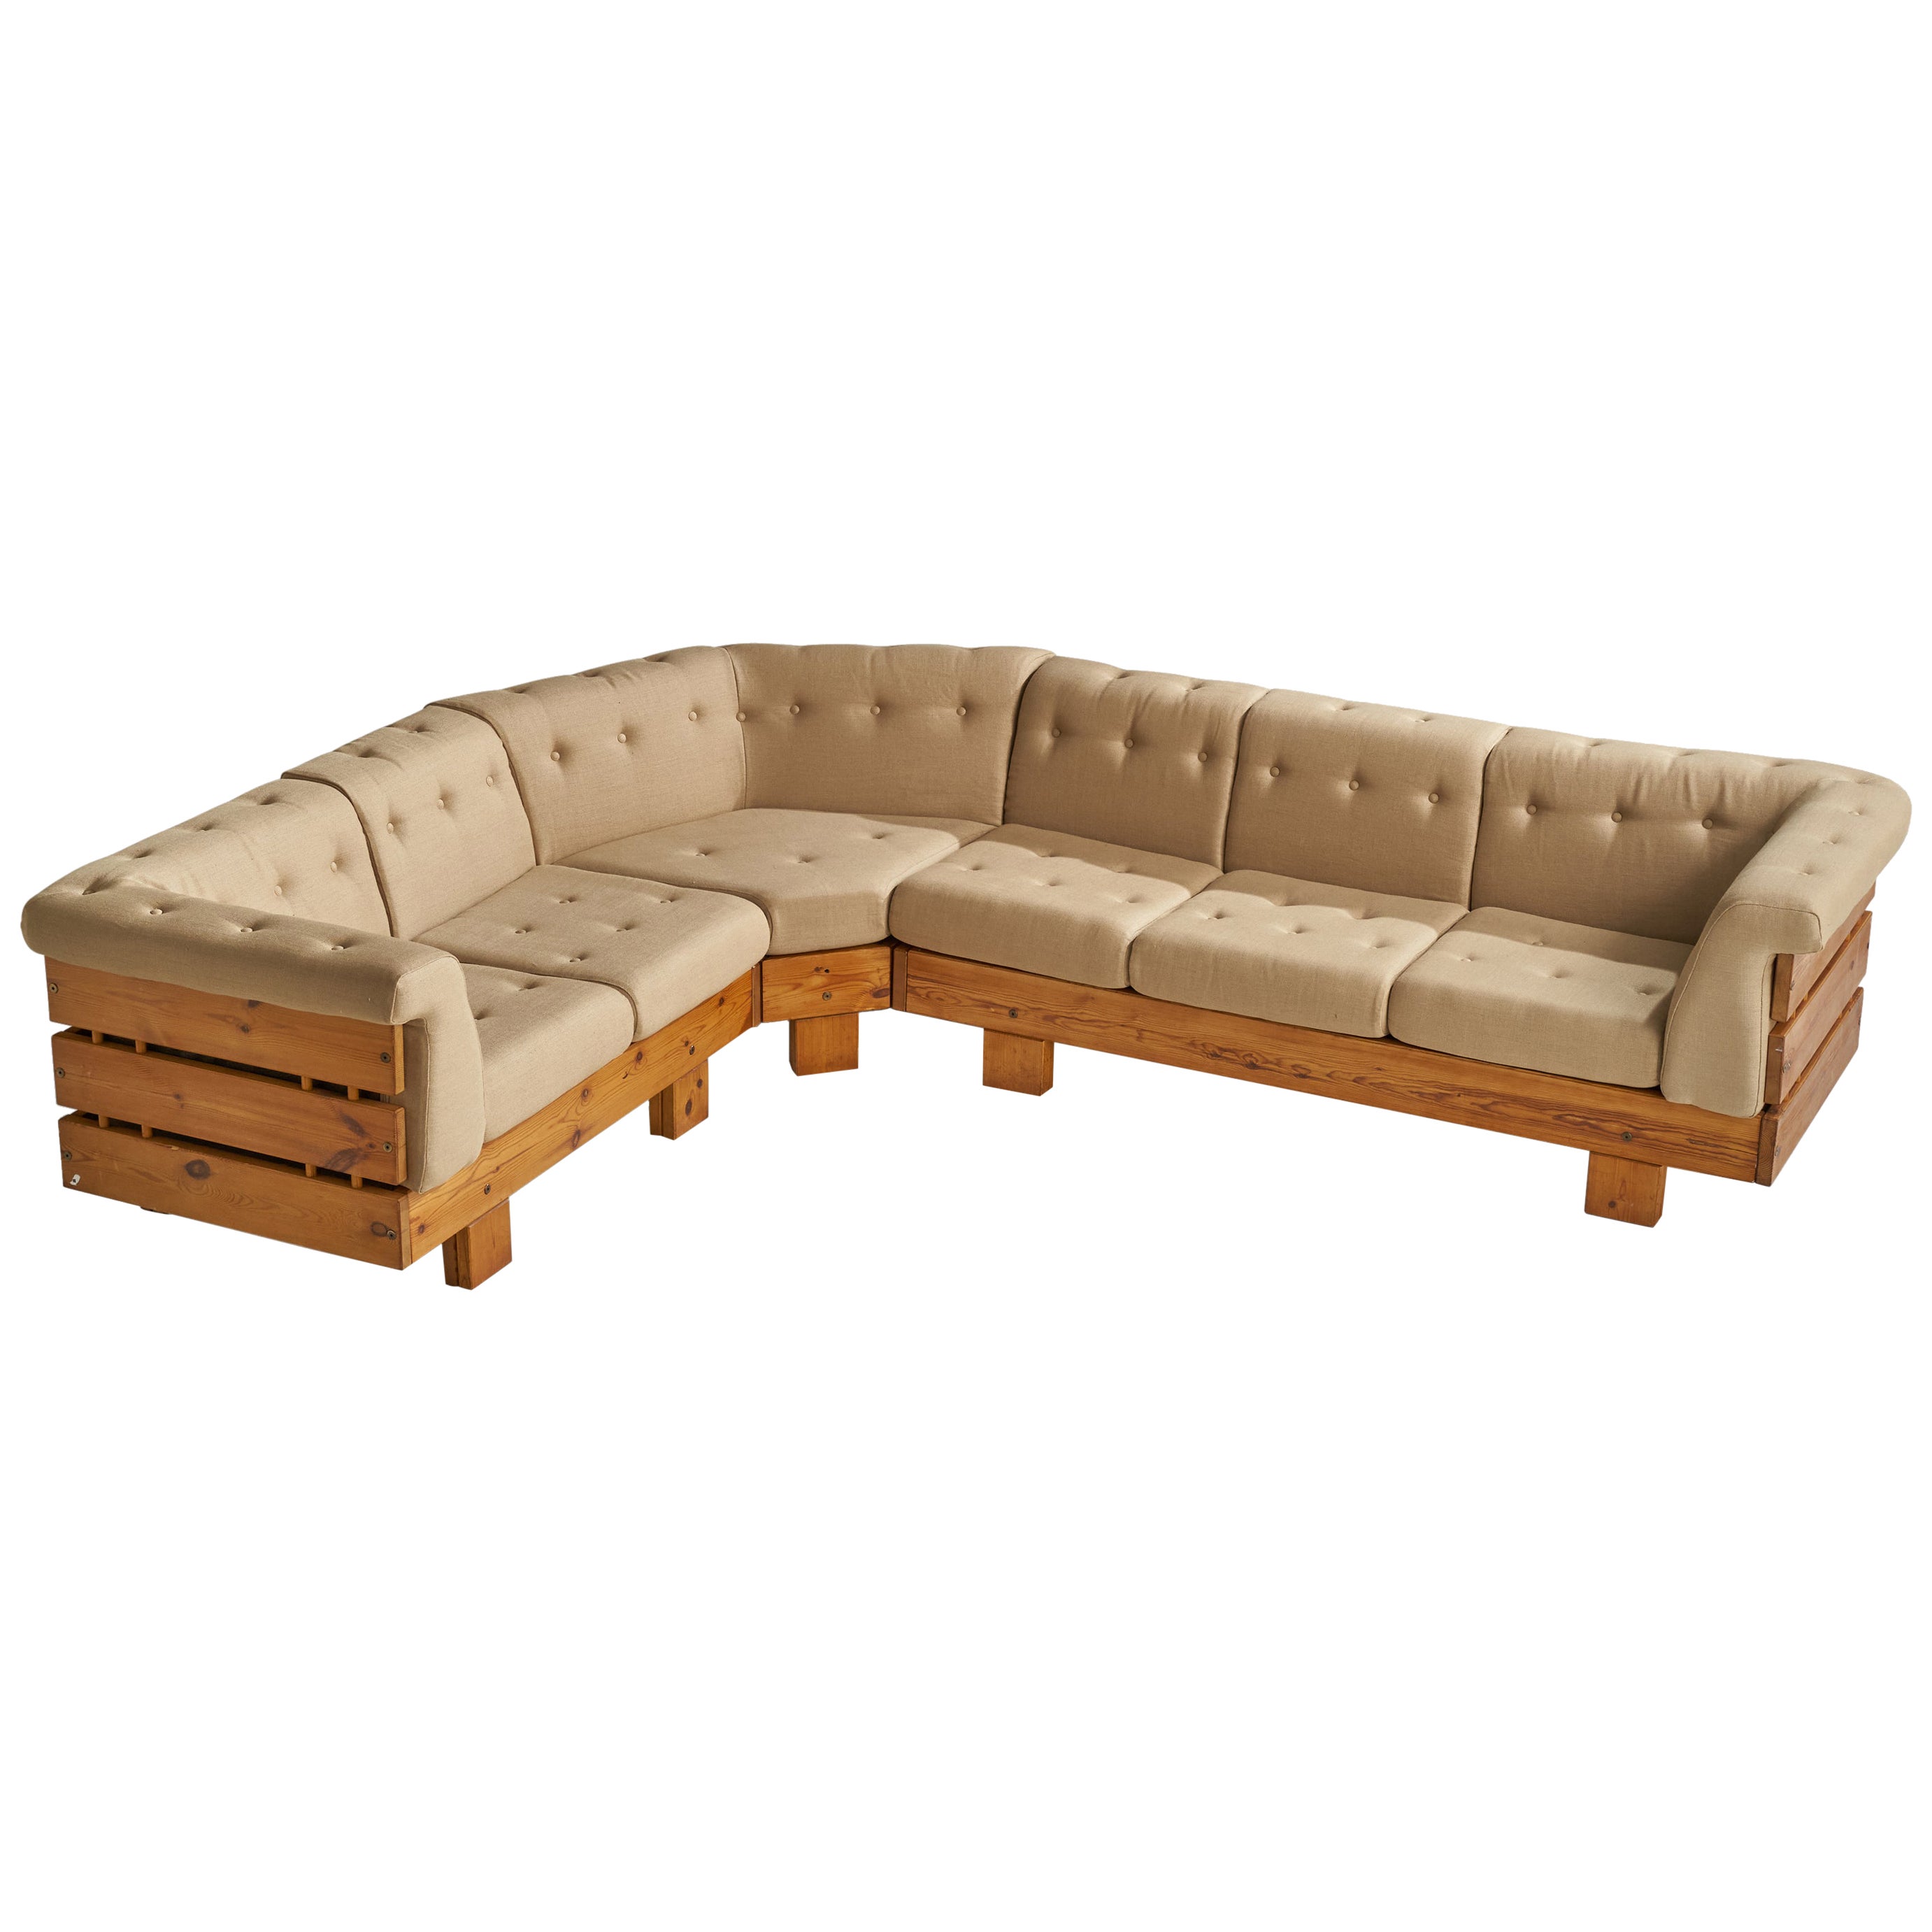 Sven Larsson, Large Sectional Sofa, Pine, Fabric, Sweden, 1970s For Sale